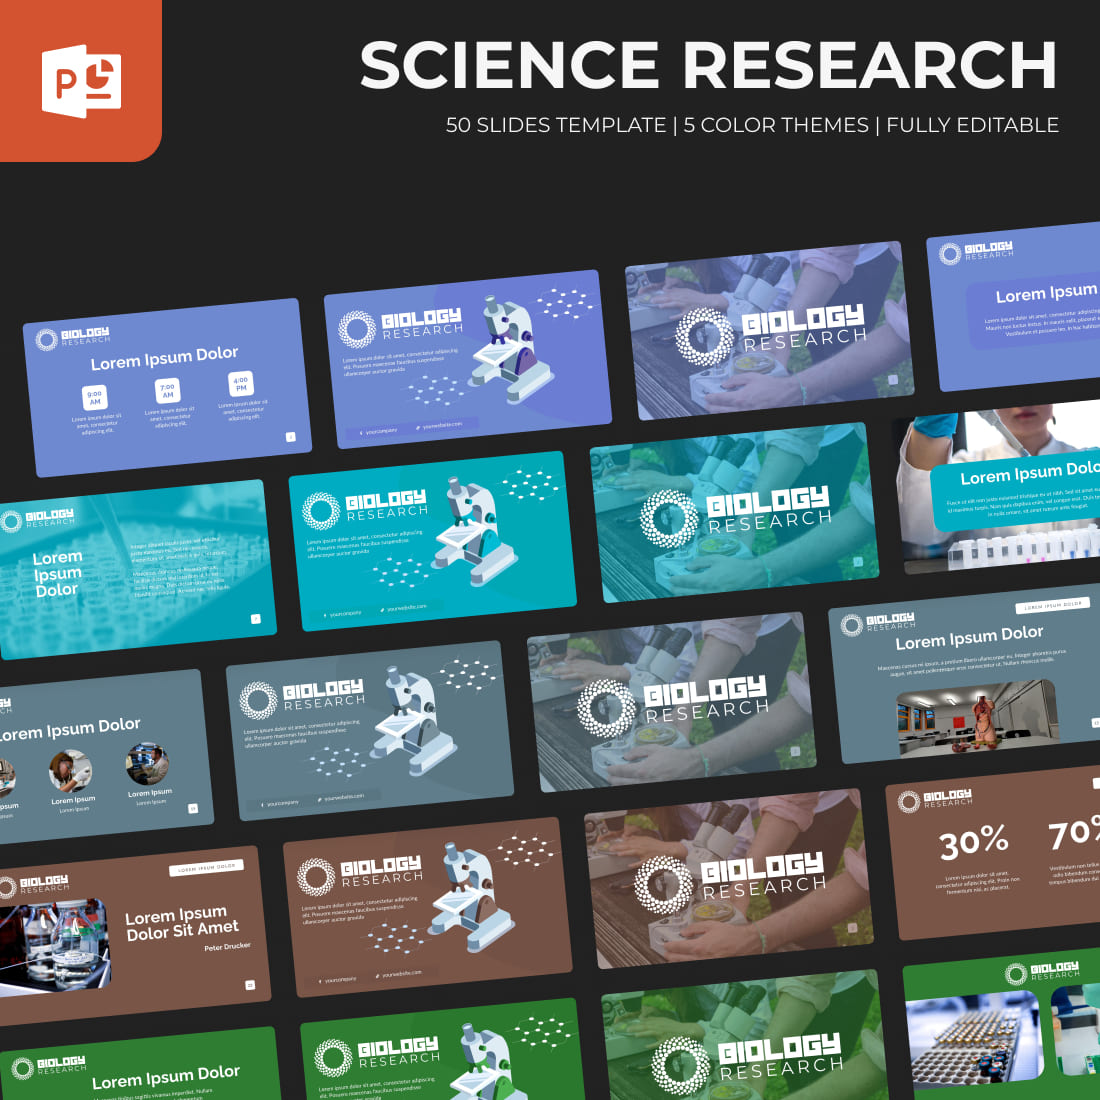 Science Research Powerpoint Template.